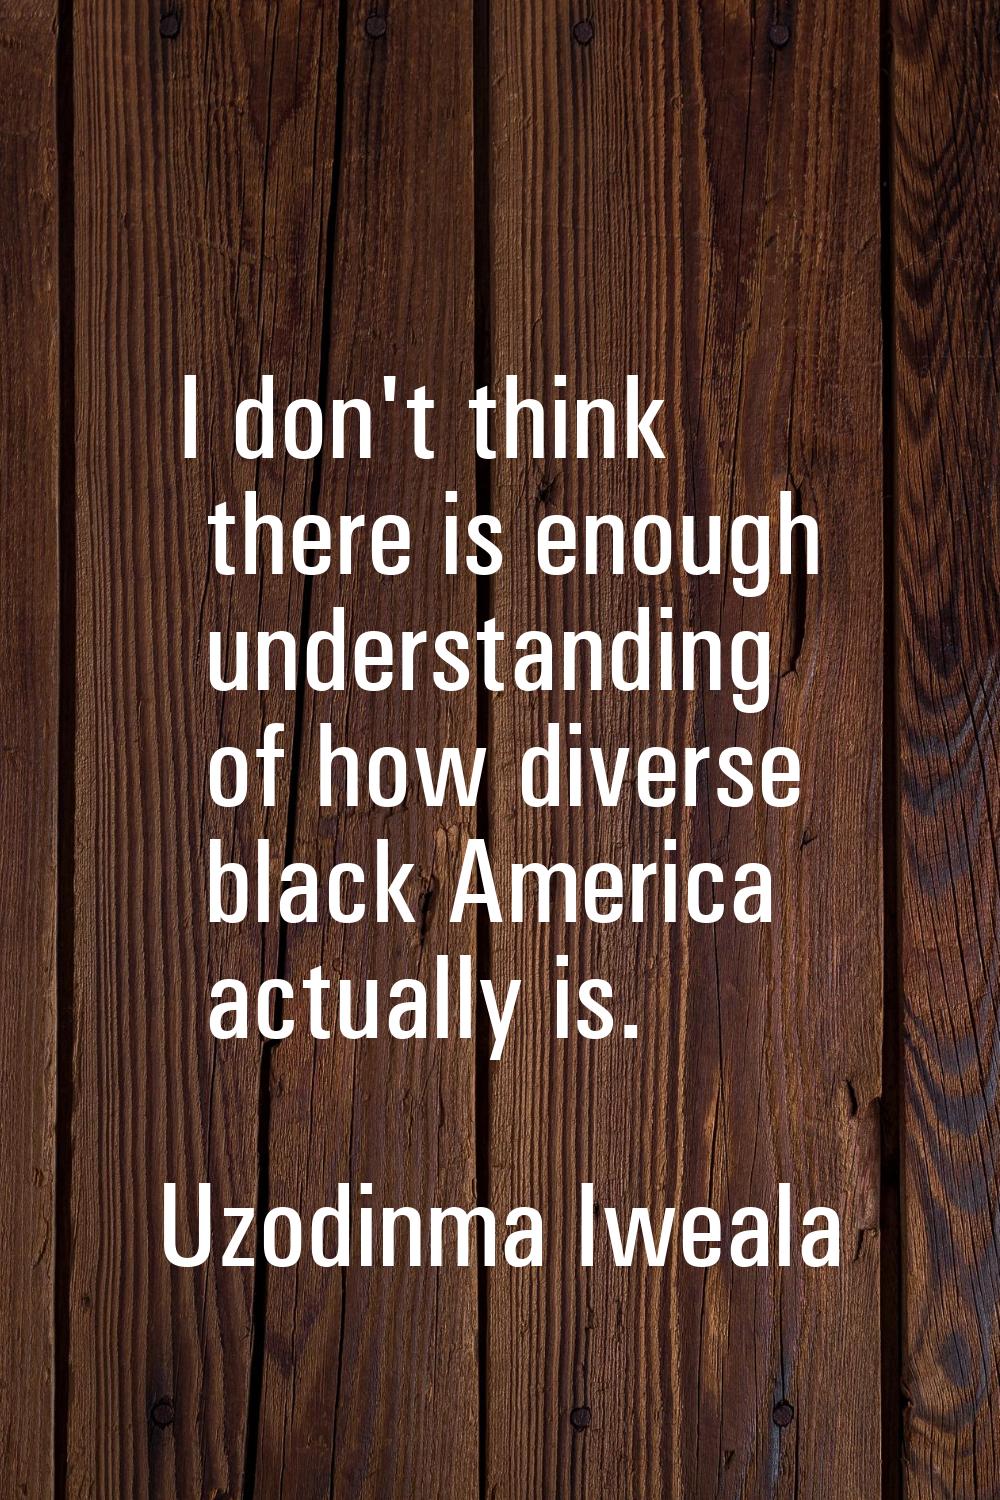 I don't think there is enough understanding of how diverse black America actually is.